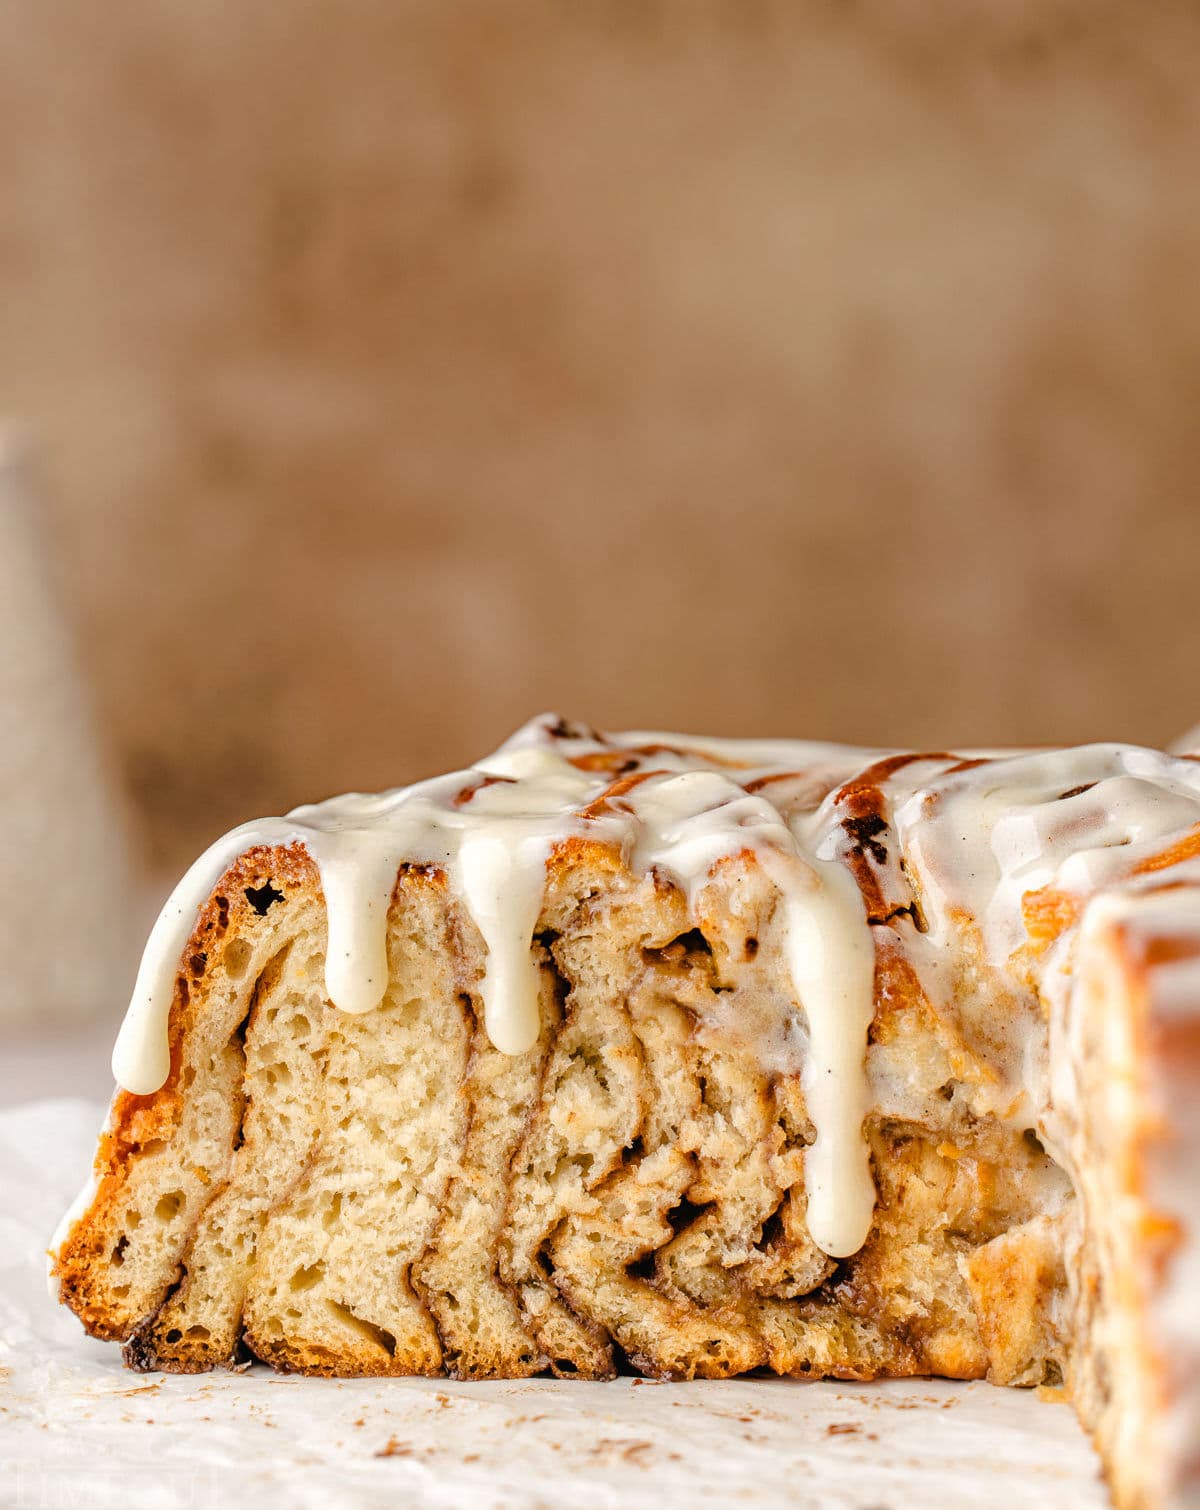 cross sectional view of the cinnamon roll cake showing all the swirls of cinnamon sugar filling with the glaze dripping down the sides of the cake.